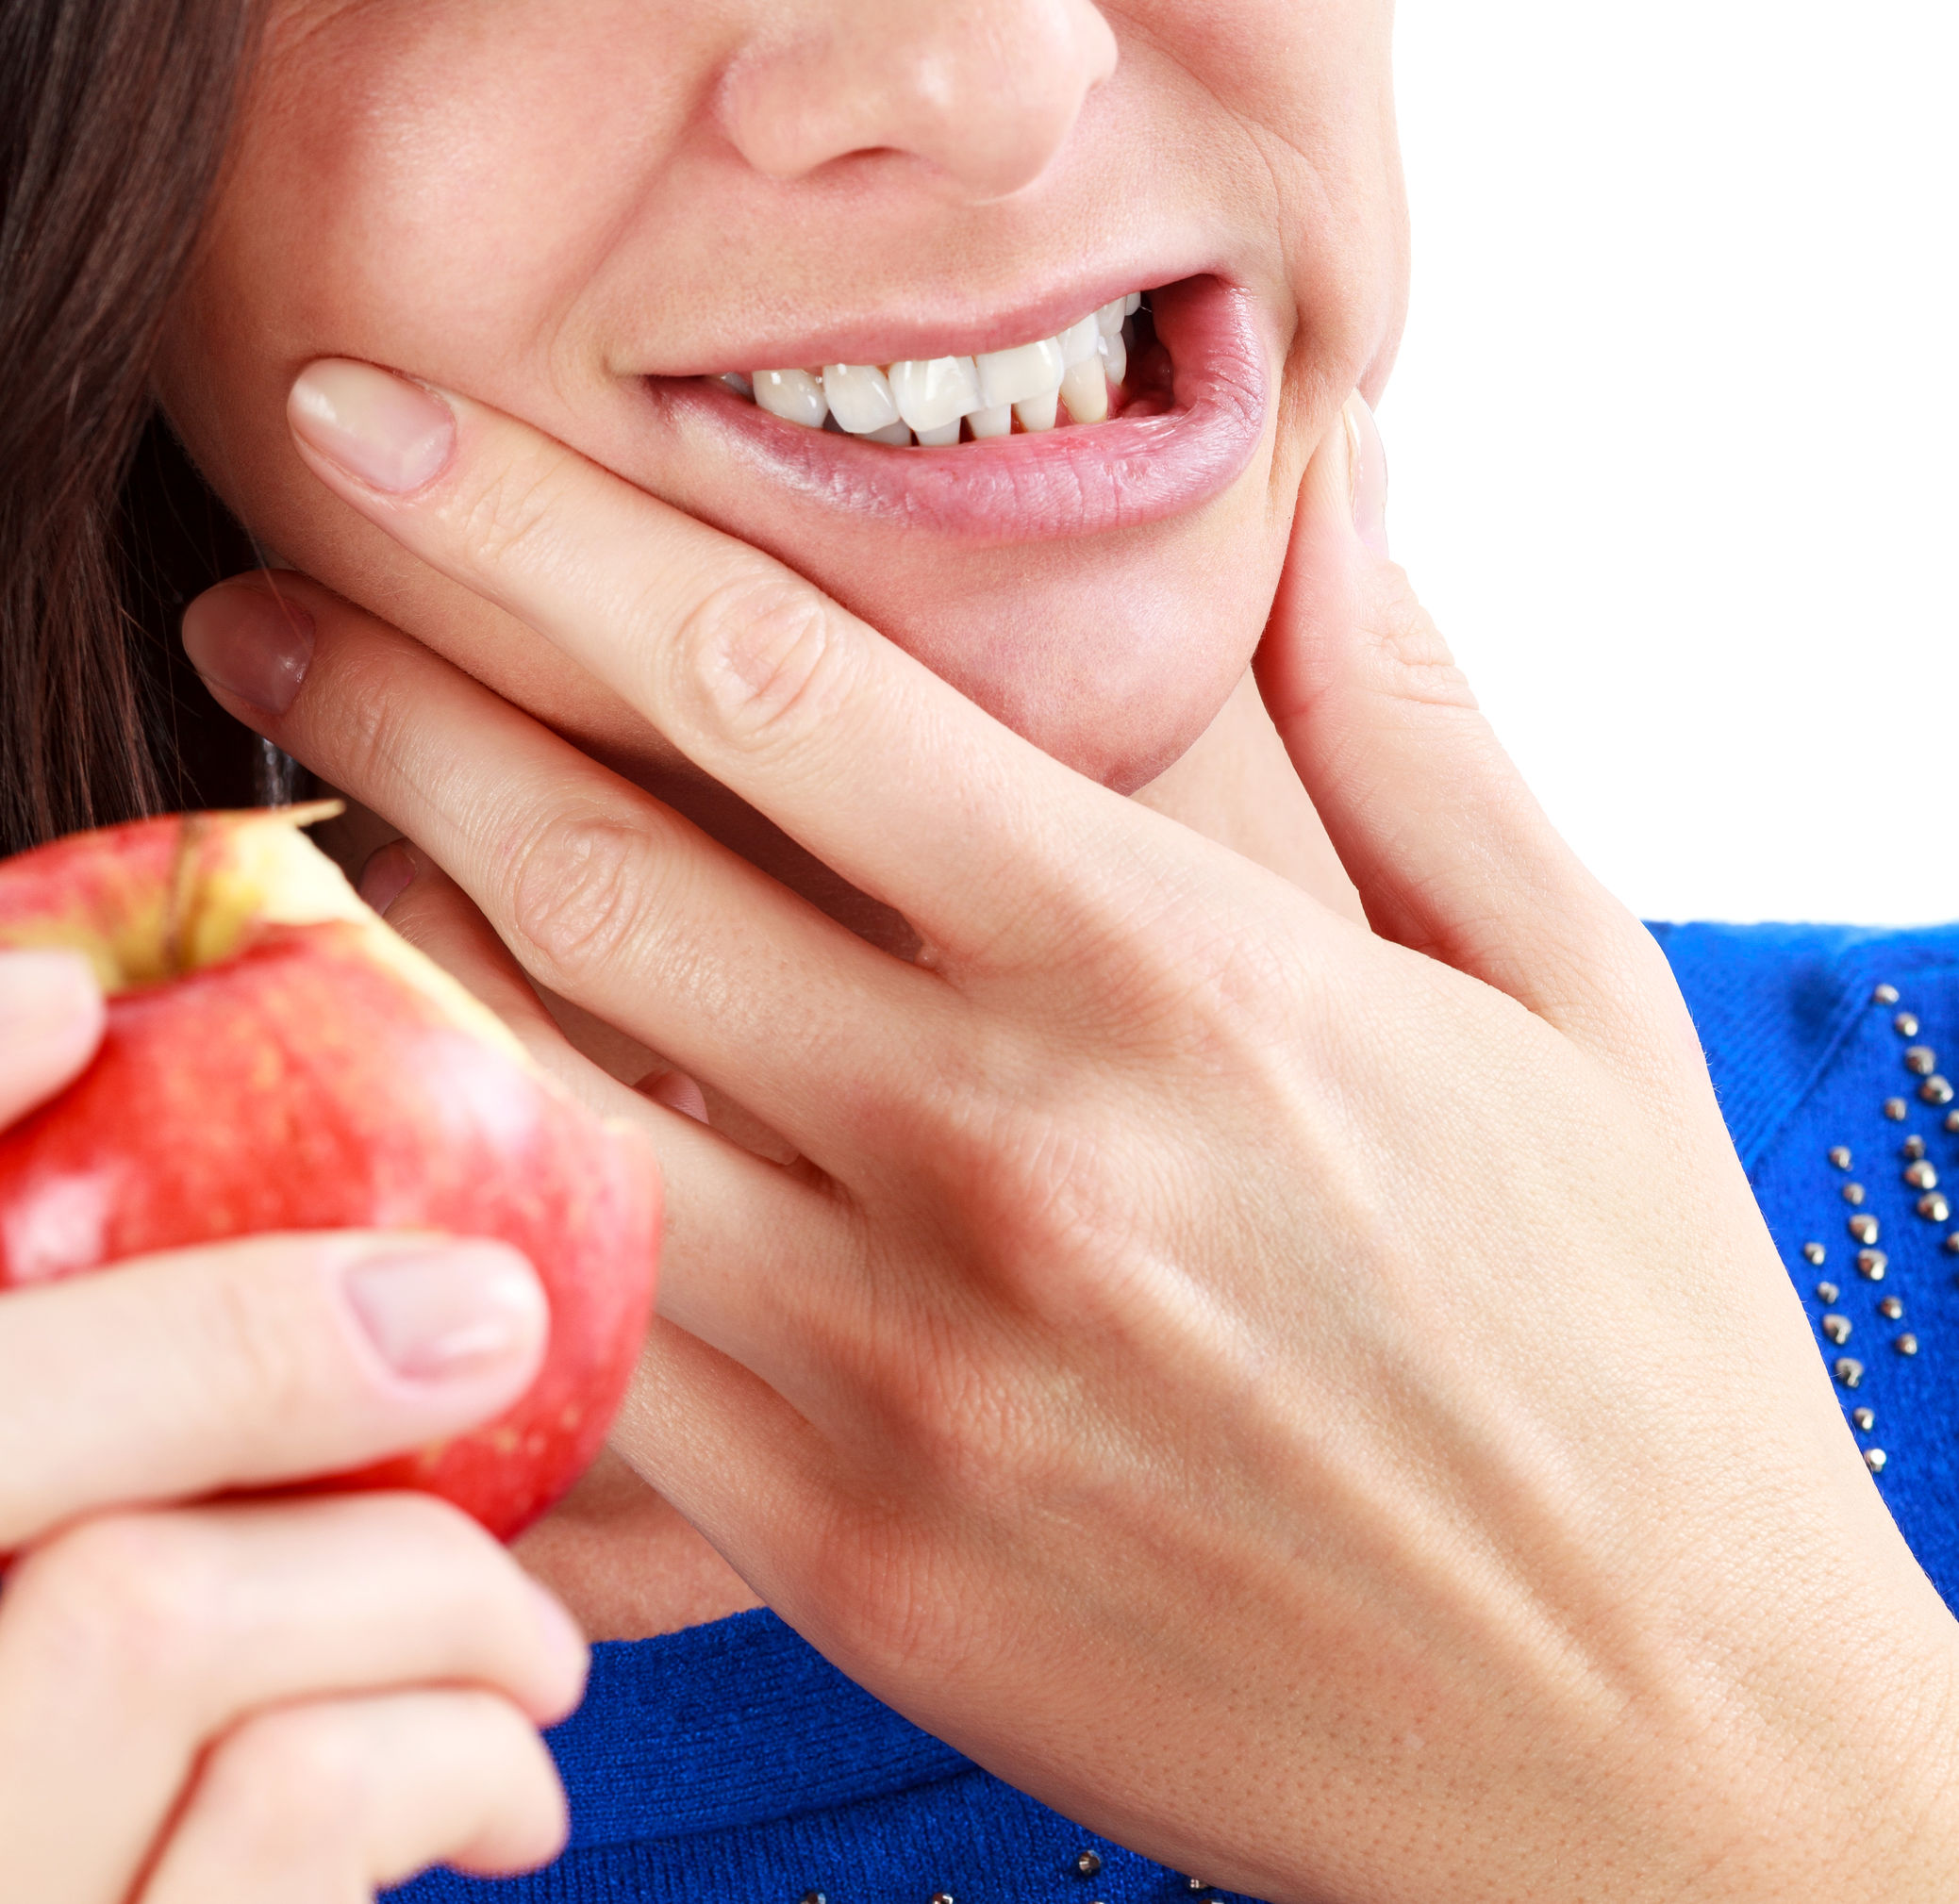 woman holding hands to jaw after eating apple with jaw pain<br />
